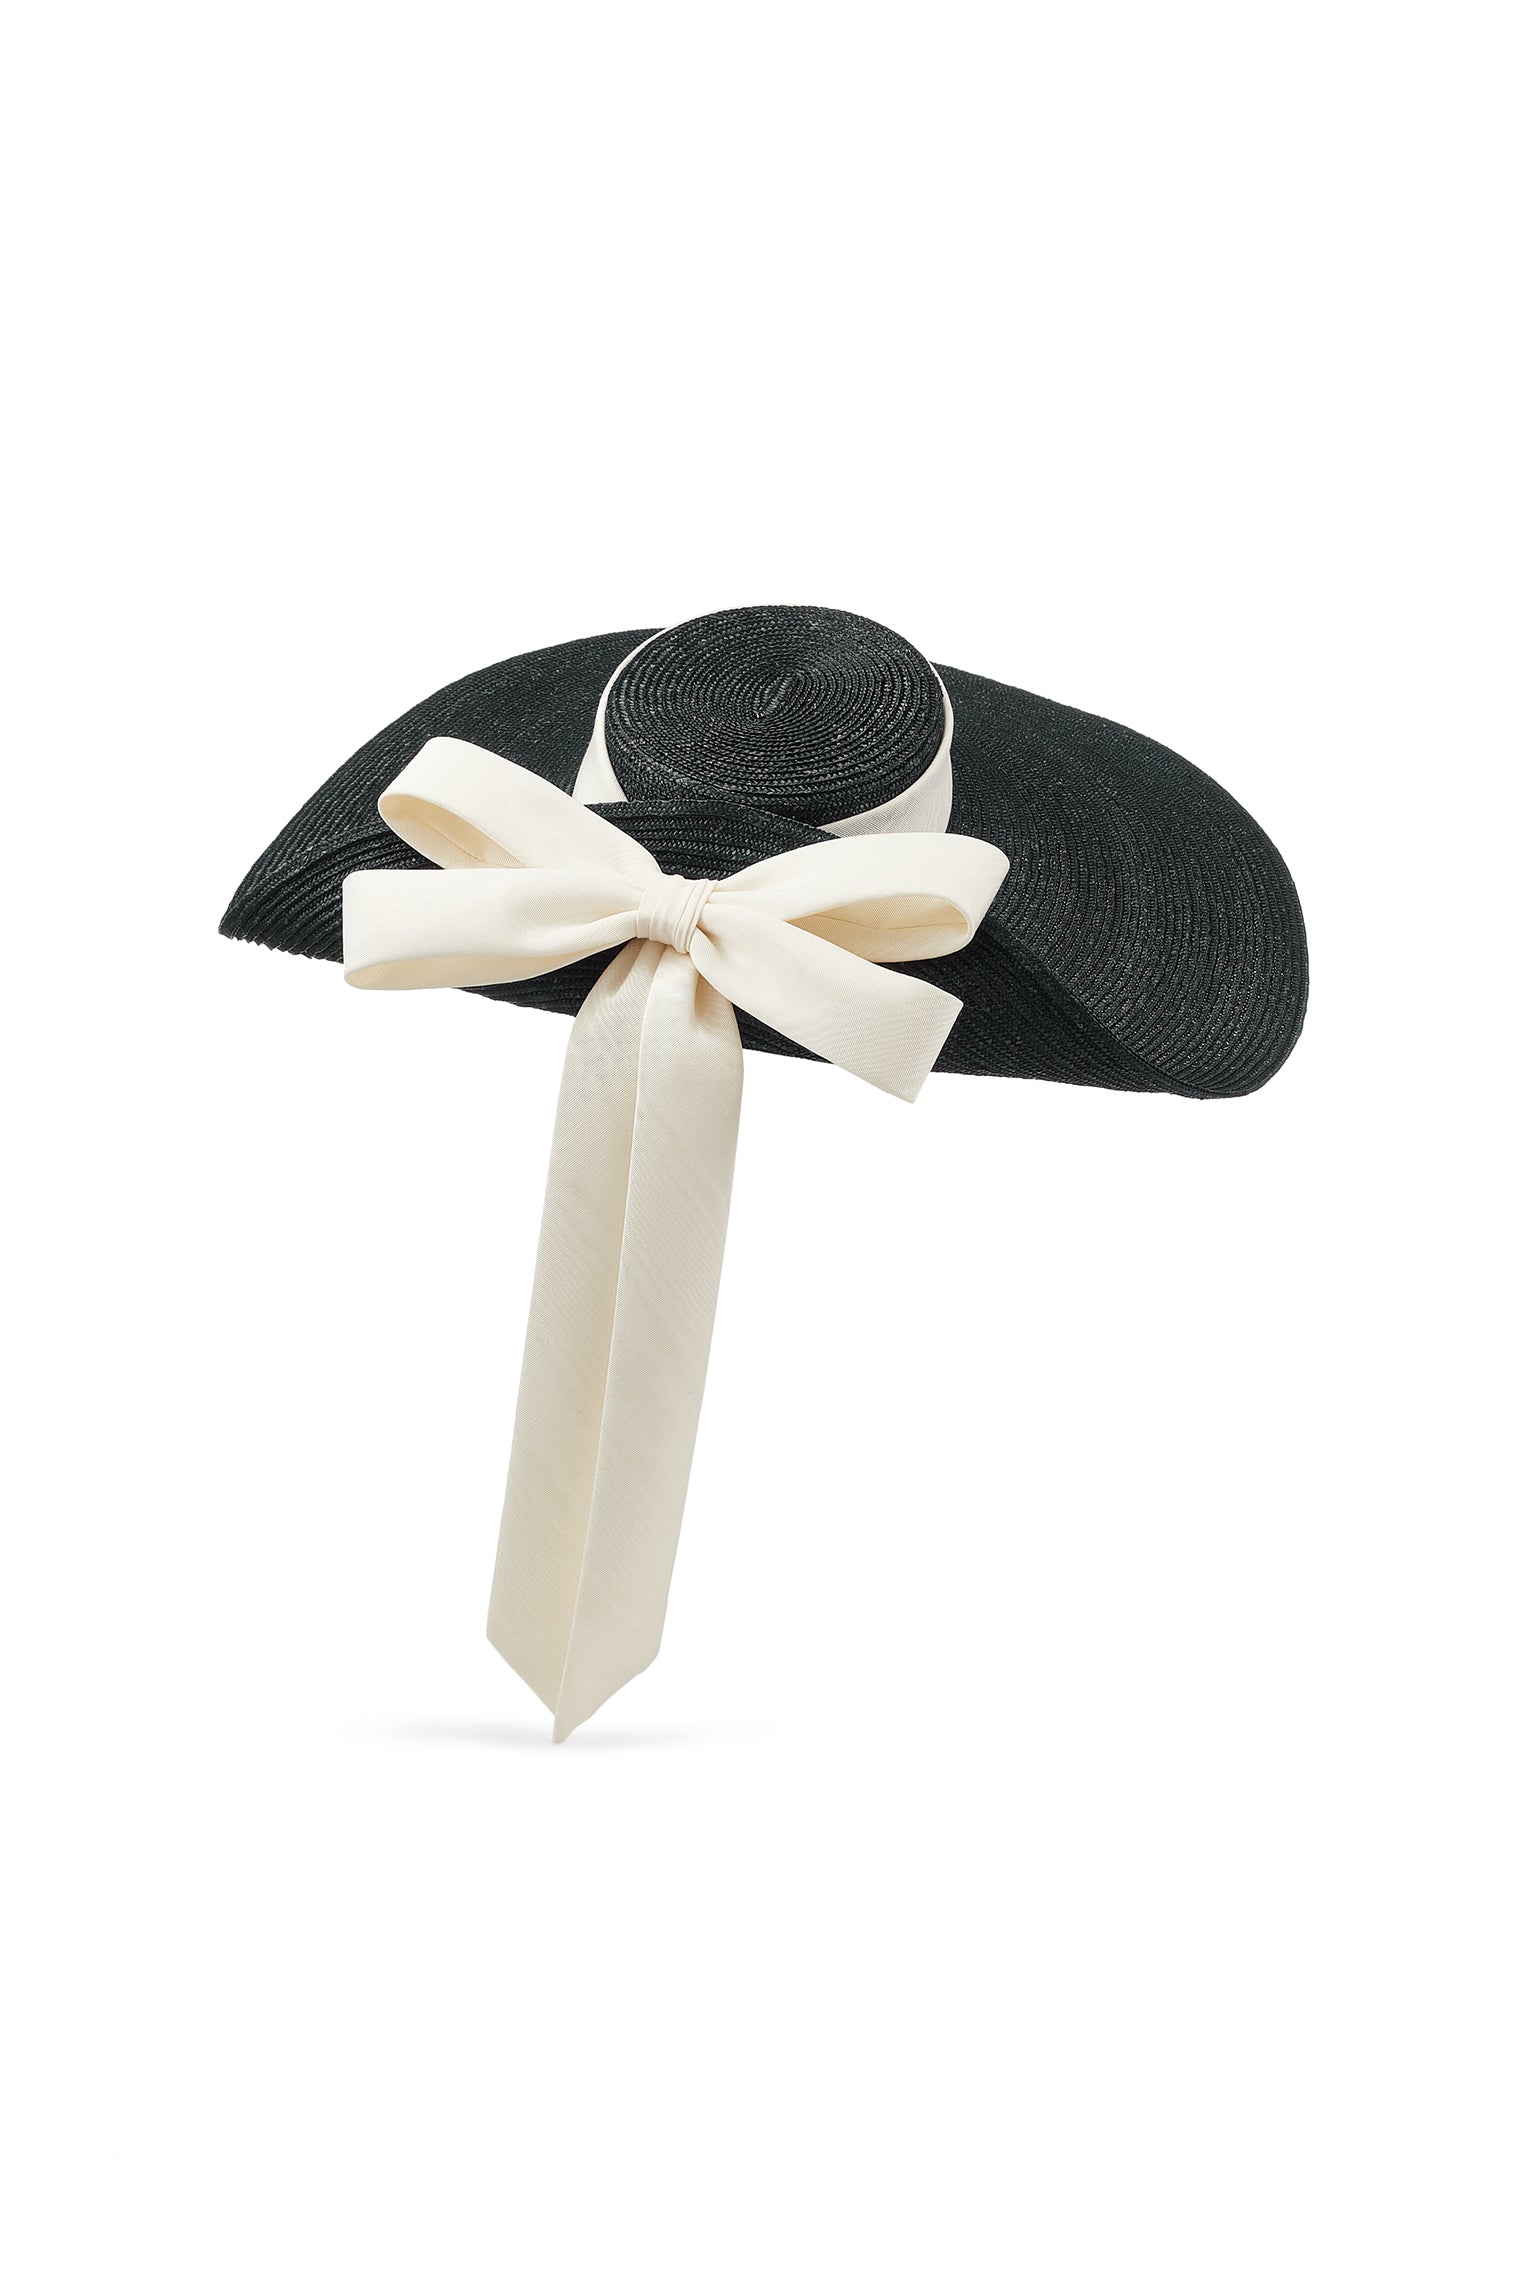 Lady Grey Black Wide Brim Hat - Lock Couture by Awon Golding - Lock & Co. Hatters London UK